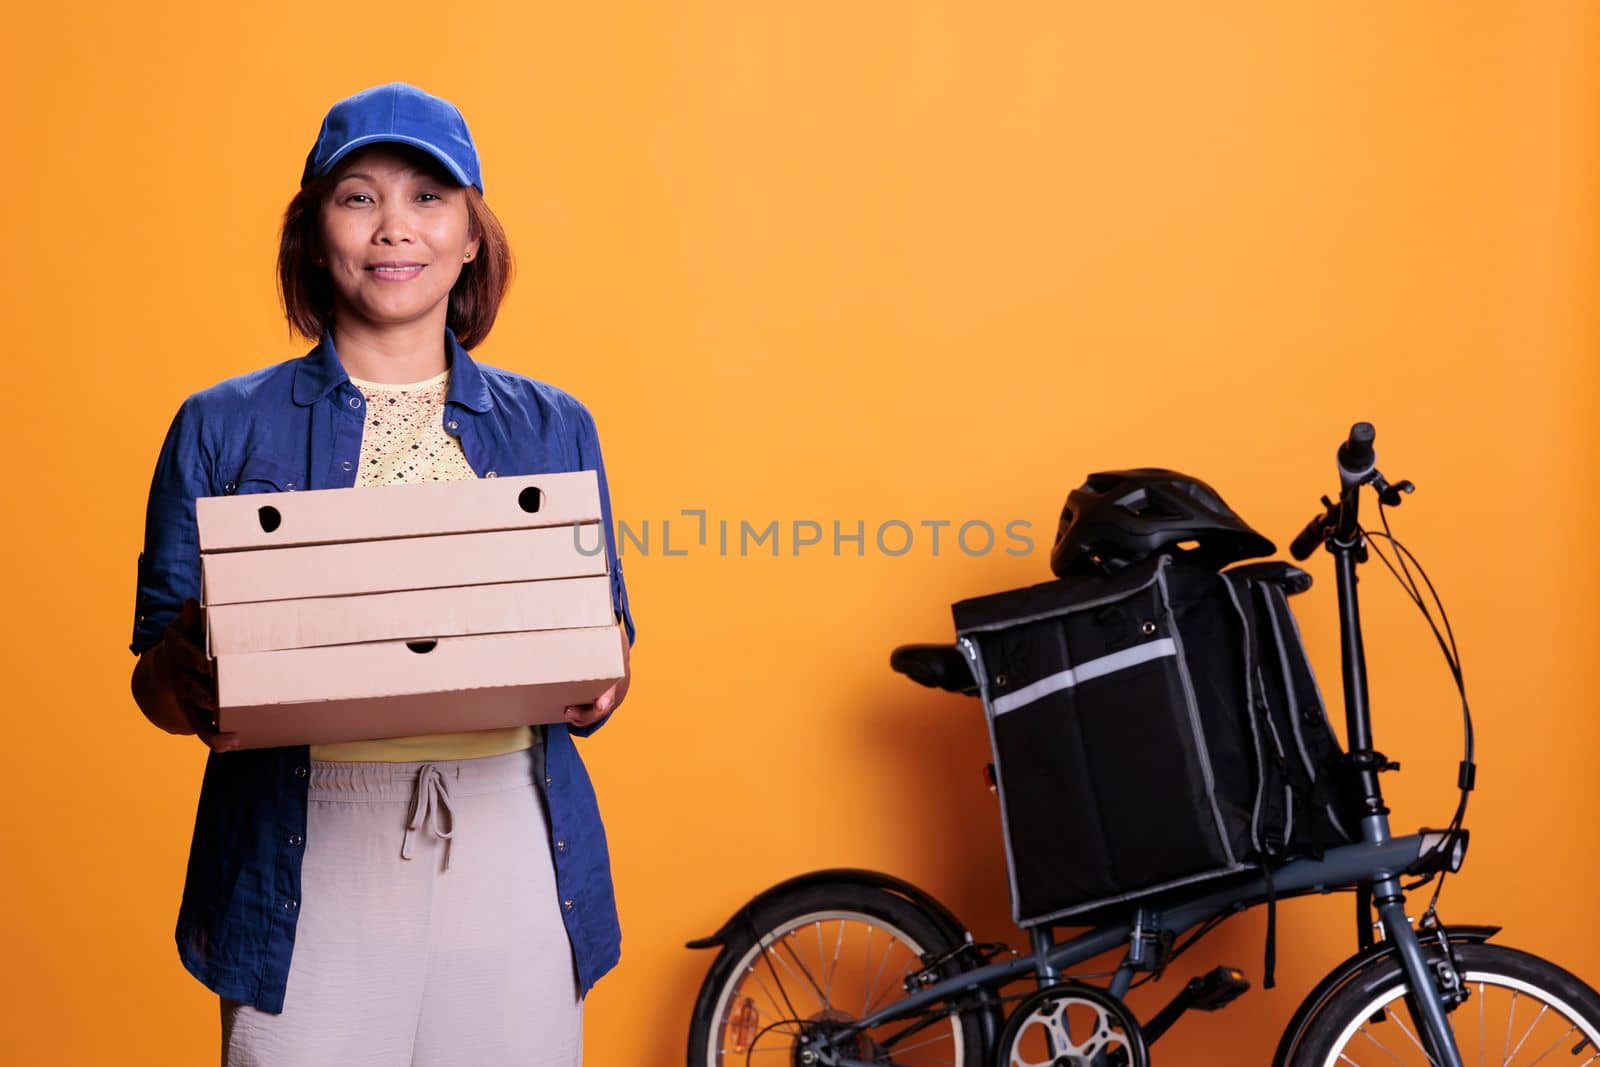 Restaurant worker wearing blue uniform holding stack of pizza delivering to customer on bike. Food delivery employee standing in studio with yellow background. Food service and transportation